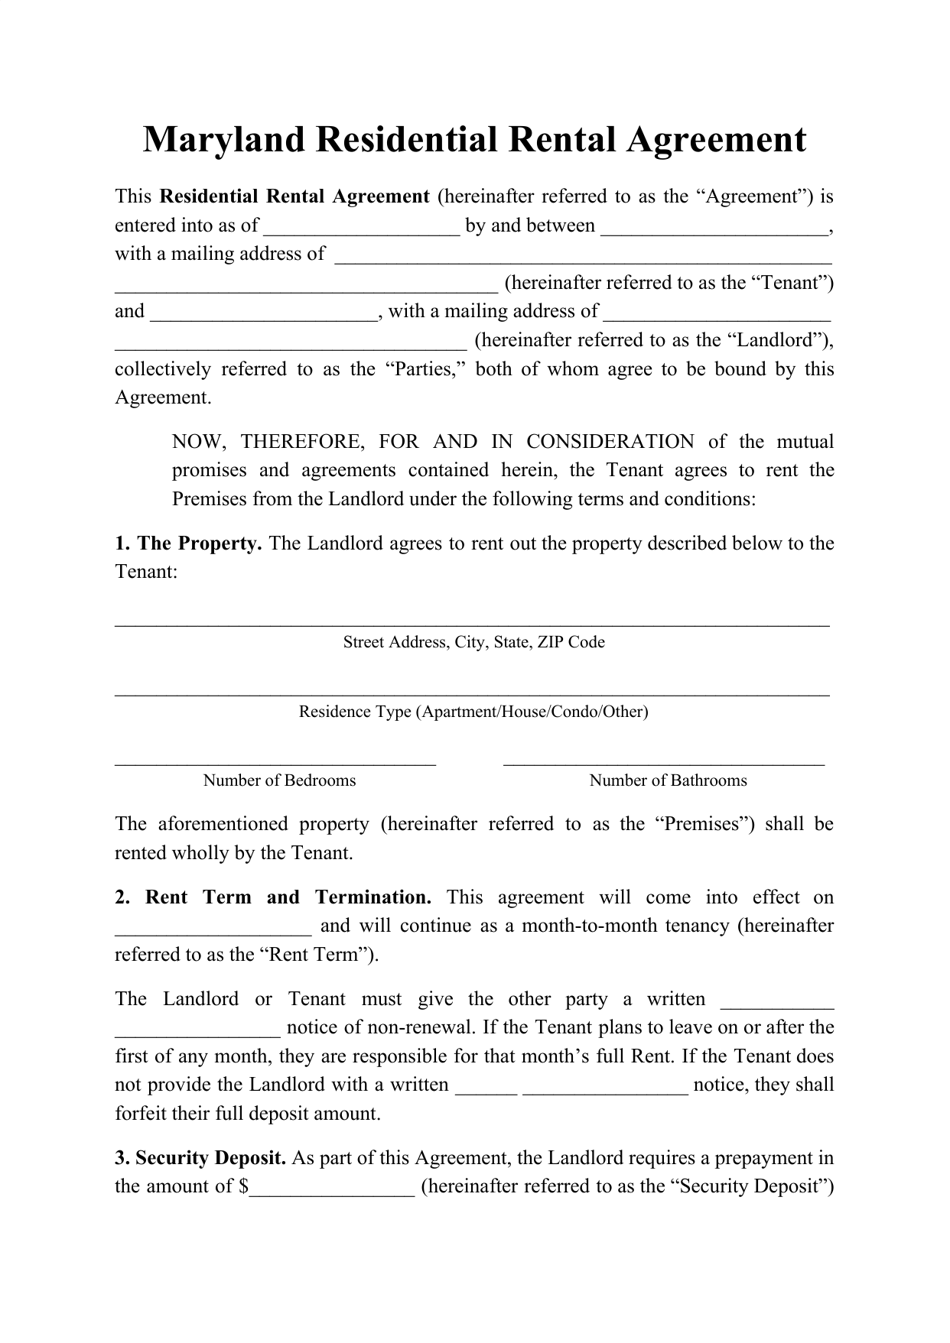 Maryland Residential Rental Agreement Template Fill Out, Sign Online